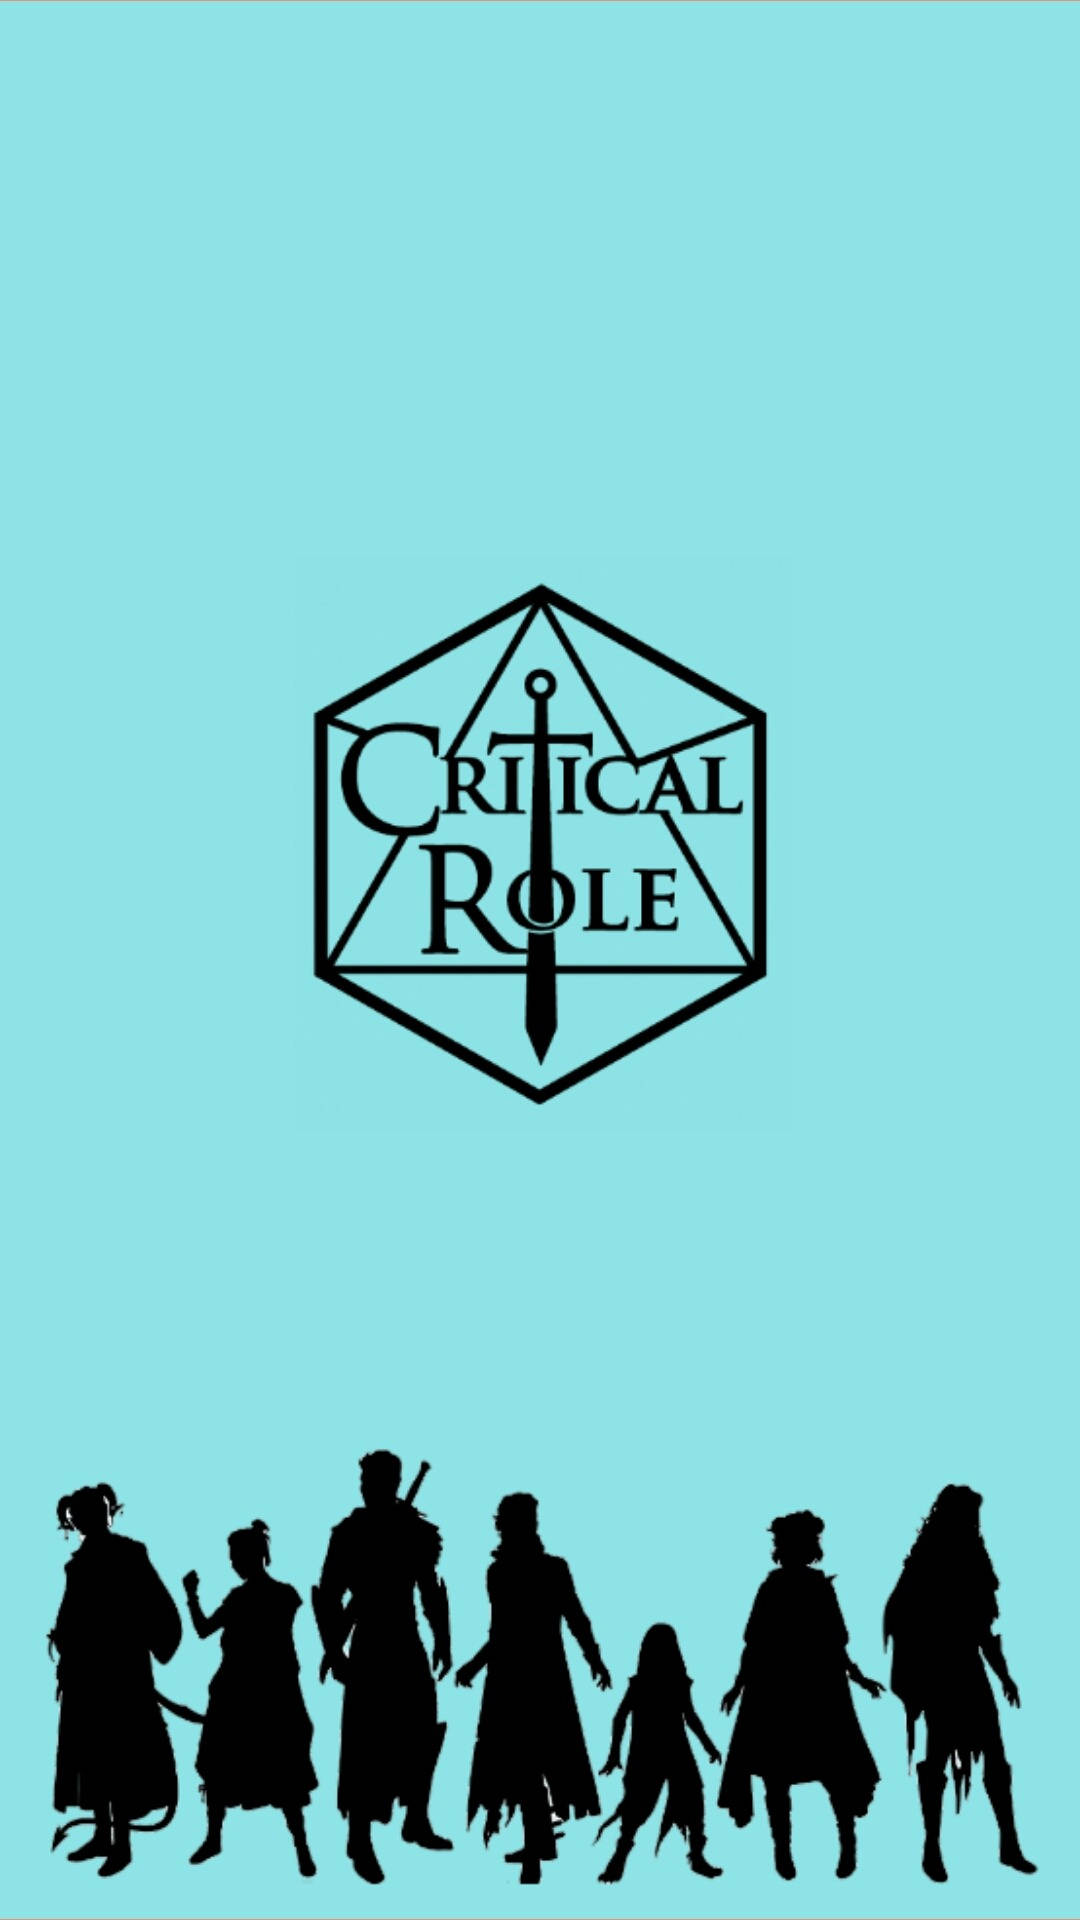 Level Up Your D&D with Critical Role! Wallpaper